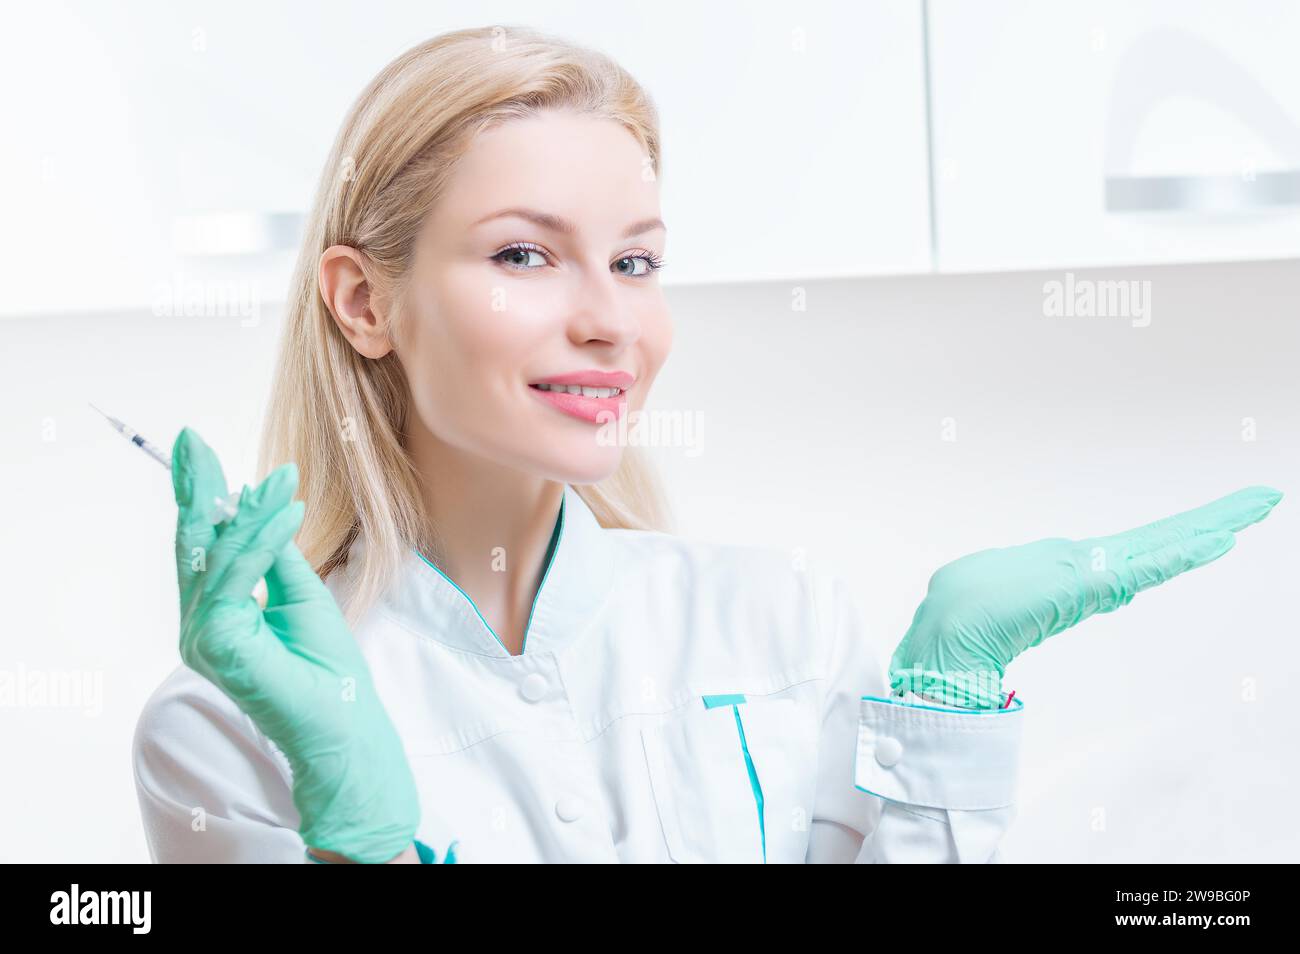 Portrait of a blonde girl in a medical gown with a syringe in her hands. Medical center advertisement. Mixed media Stock Photo